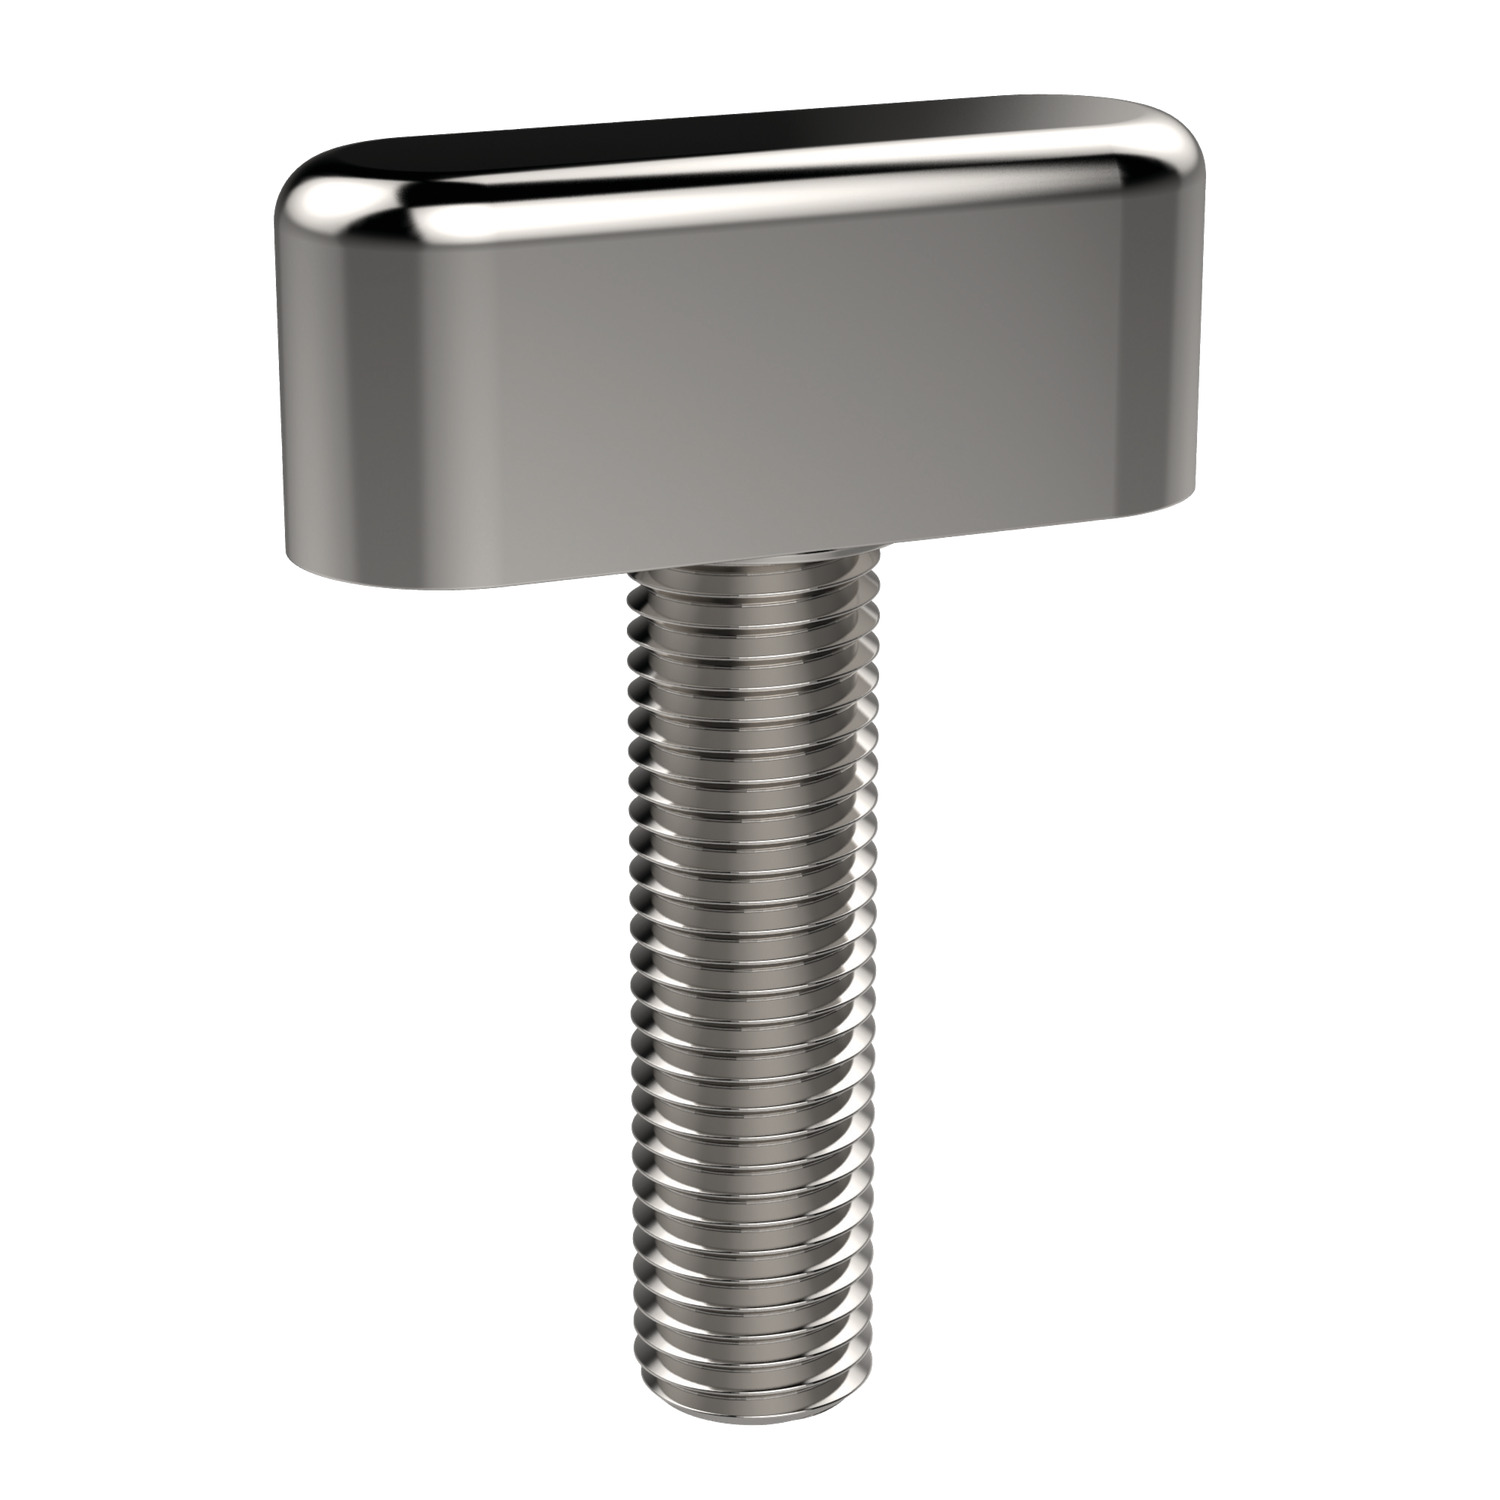 Quarter Turn Screw, Male Stainless steel, male, quarter-turn Screws. Extra gripping surface allows higher clamping torques to be applied compared to knurled handles.